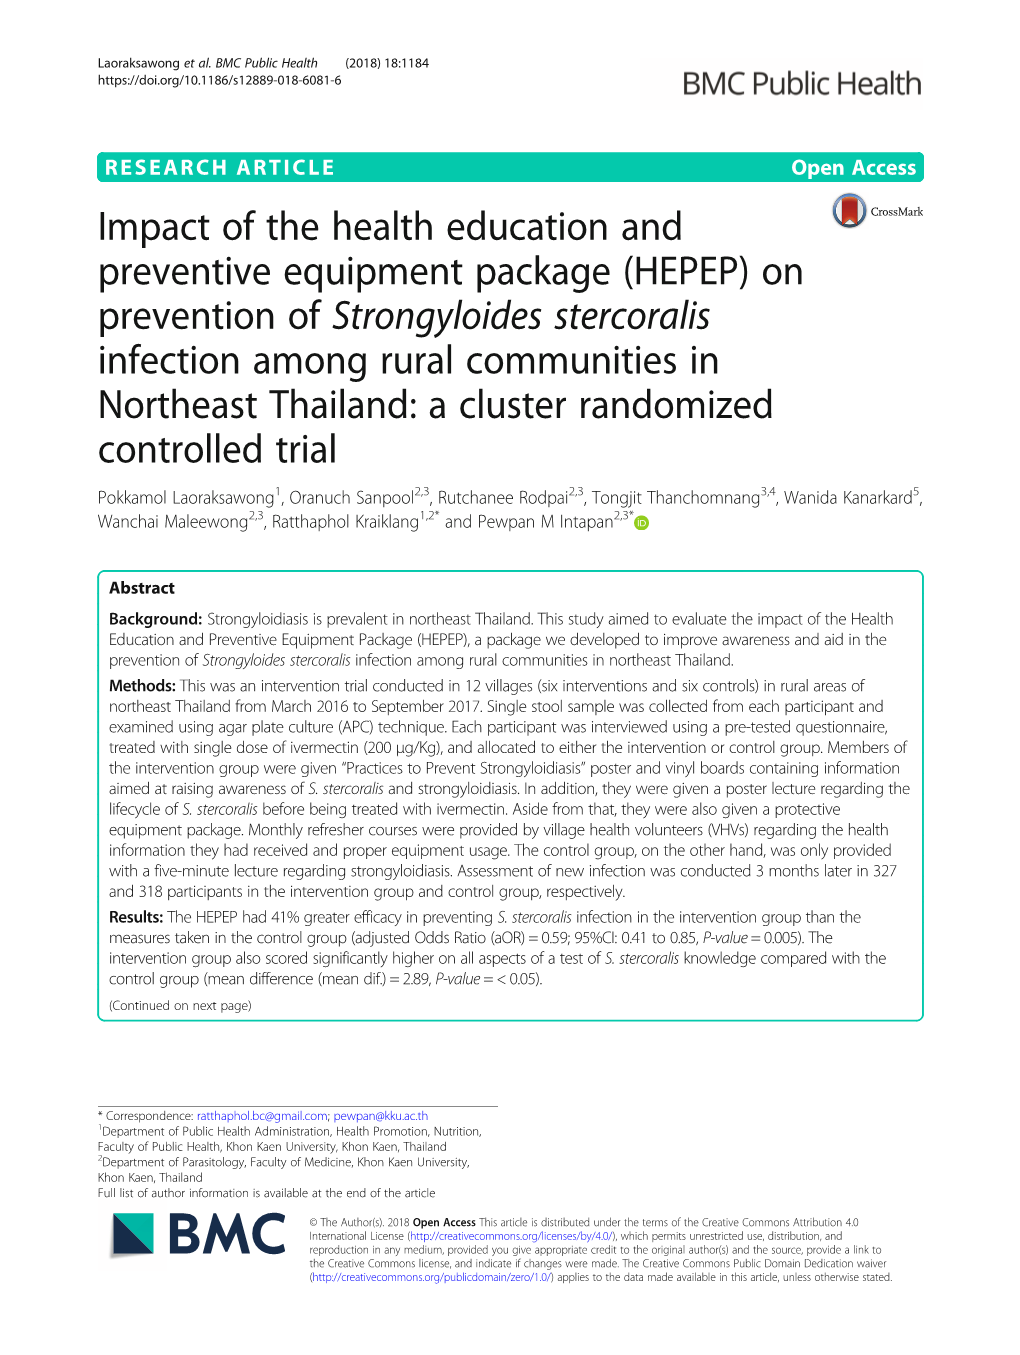 Impact of the Health Education and Preventive Equipment Package (HEPEP) on Prevention of Strongyloides Stercoralis Infection